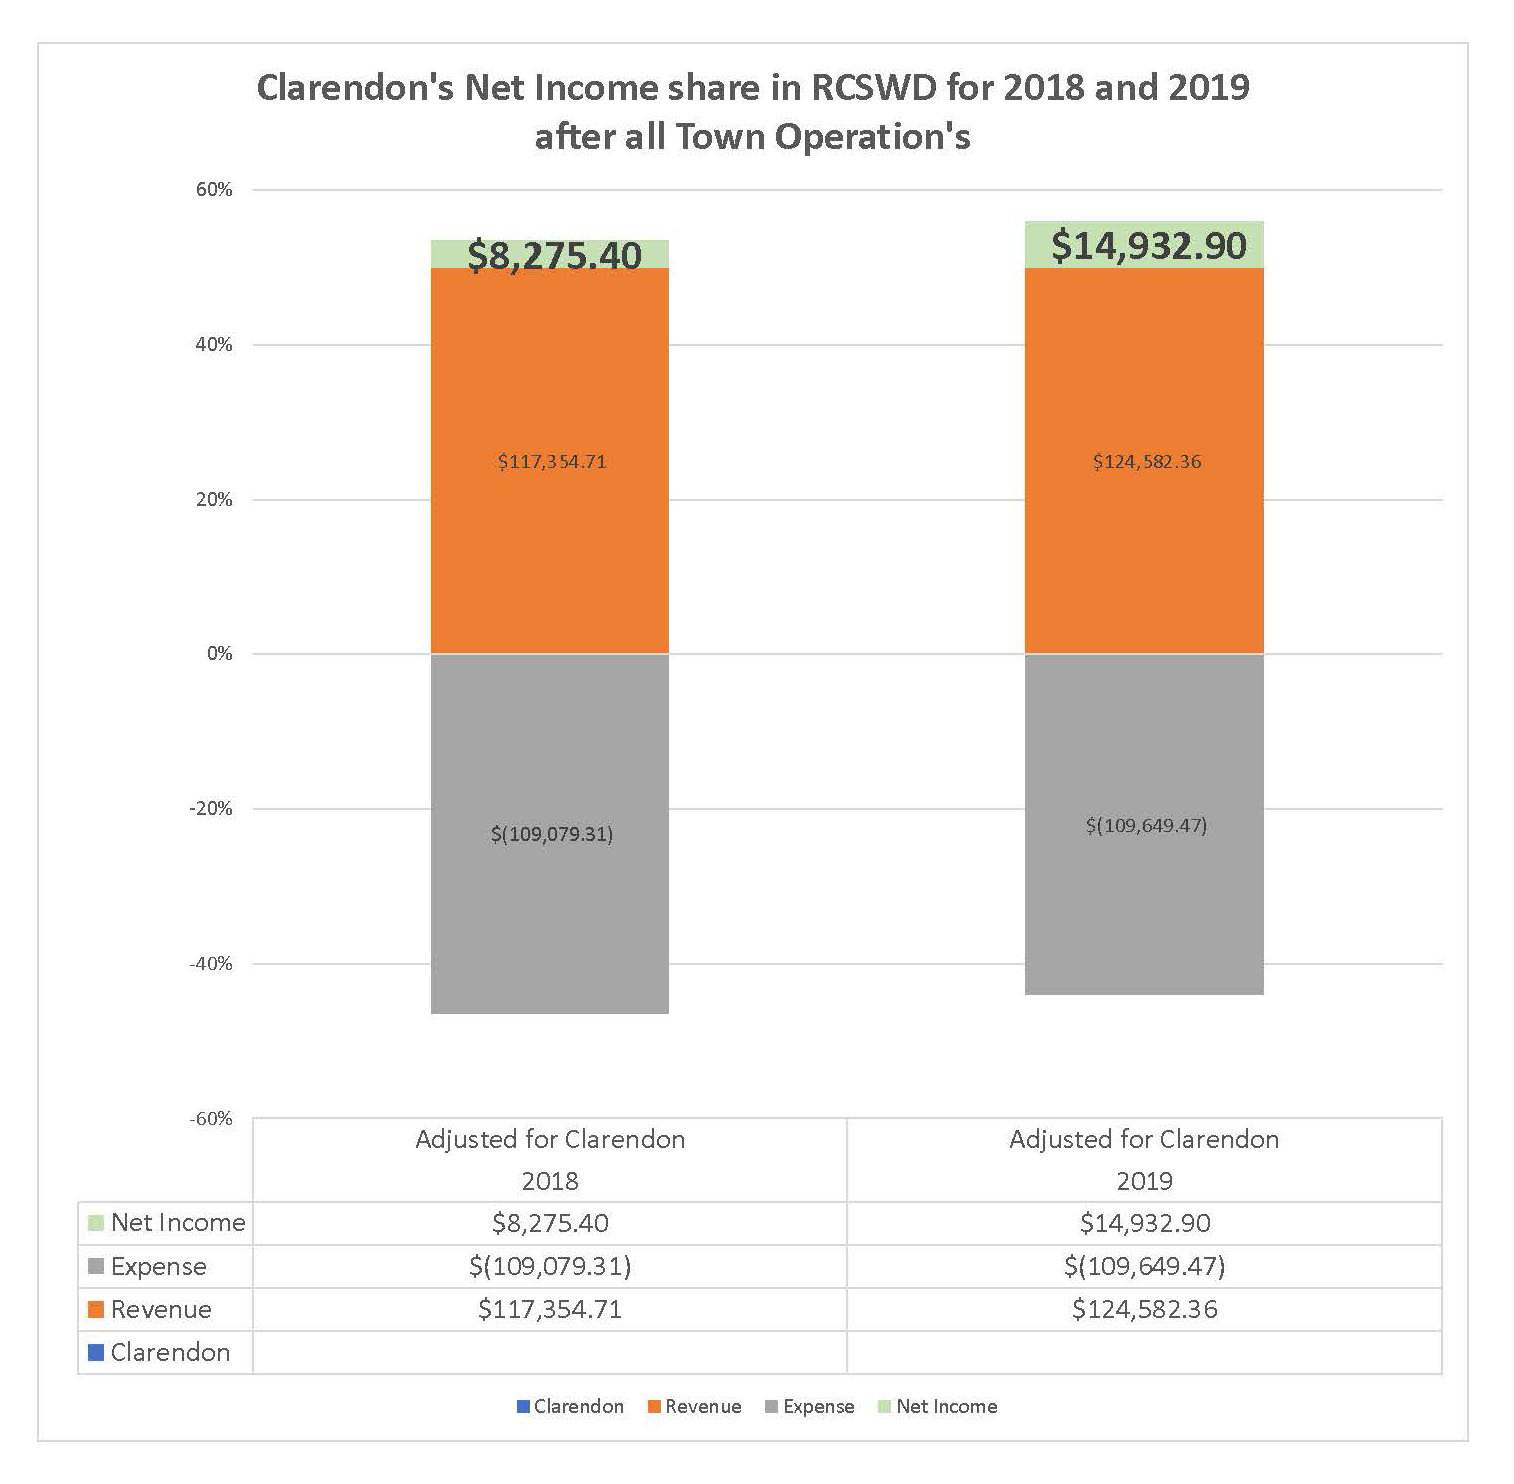 Clarendon's proportional net income in RCSWD for 2018 and 2019